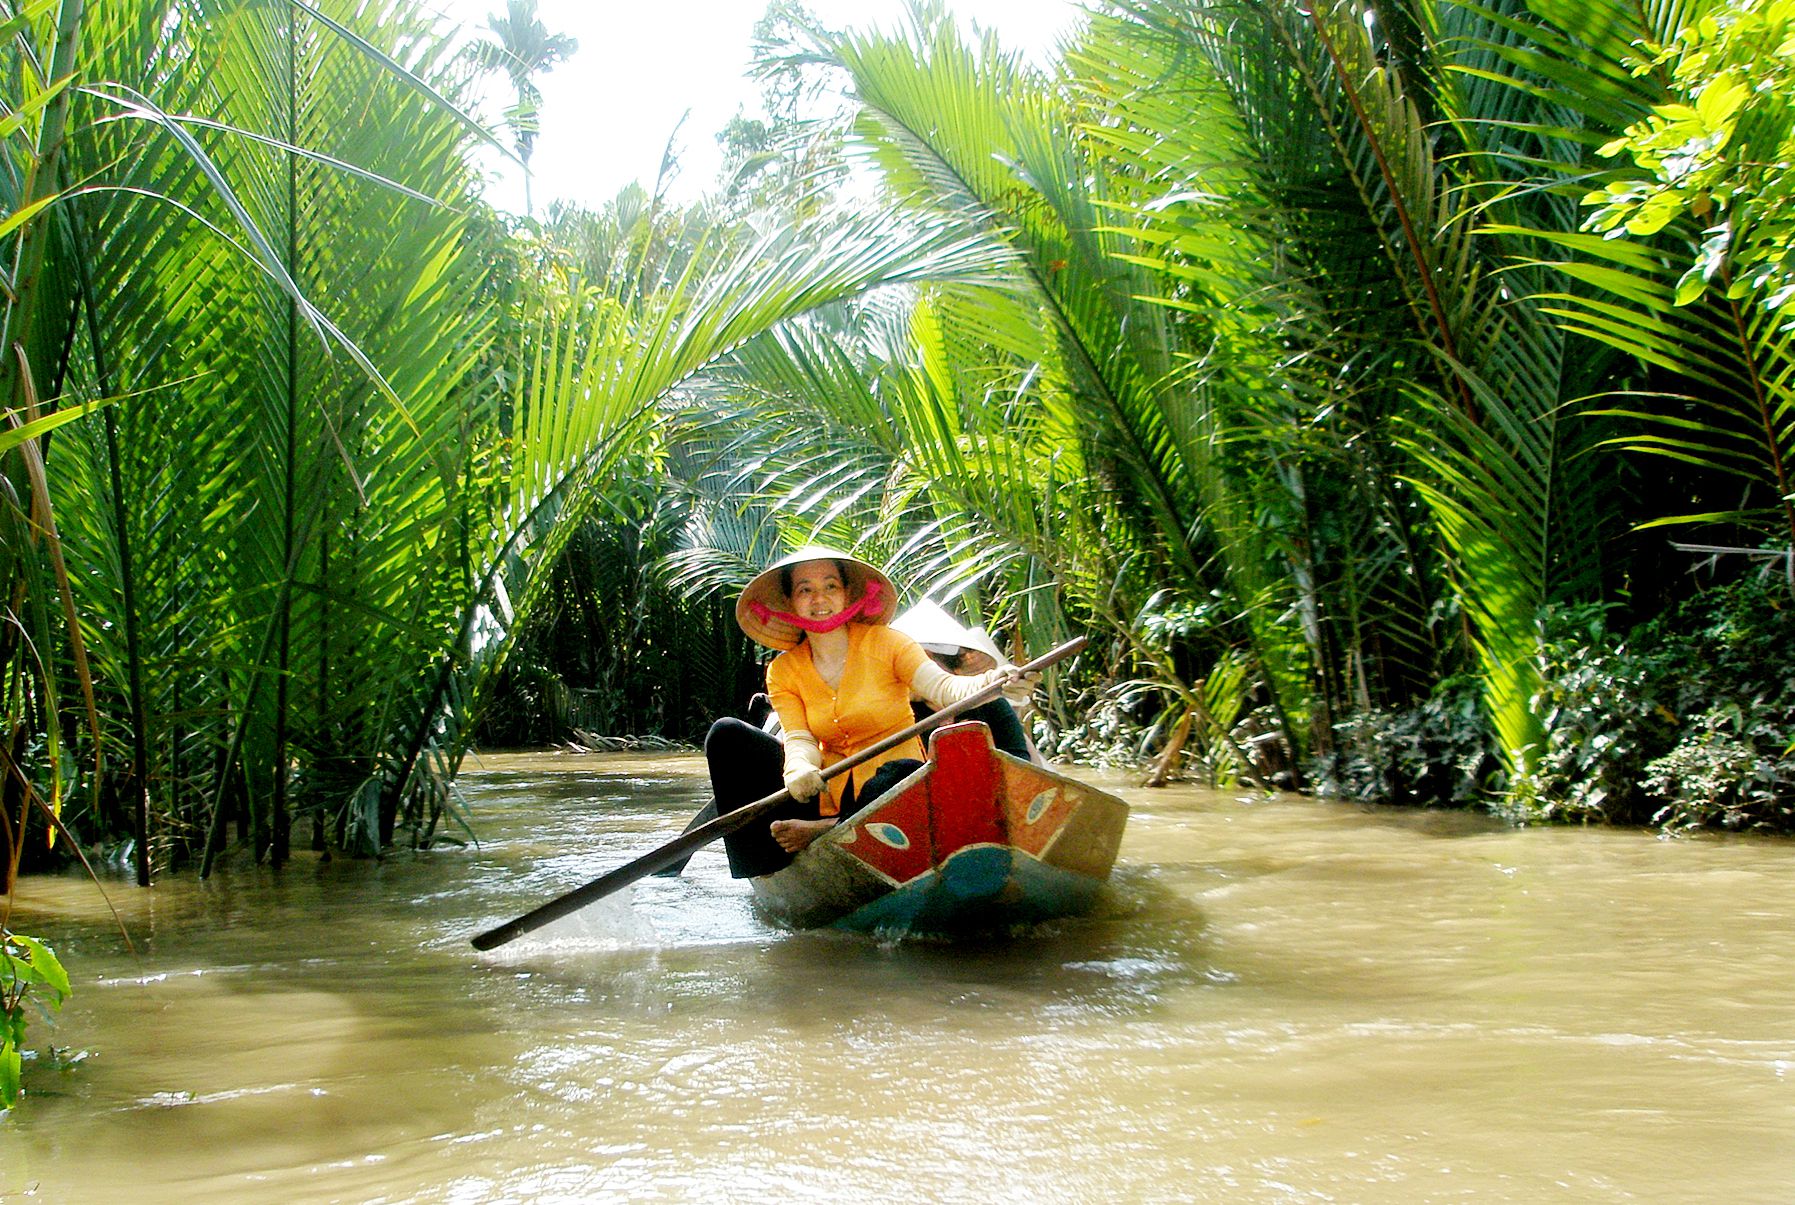 FROM MUI NE TO CU CHI TUNNEL AND MEKONG DELTA TOUR 